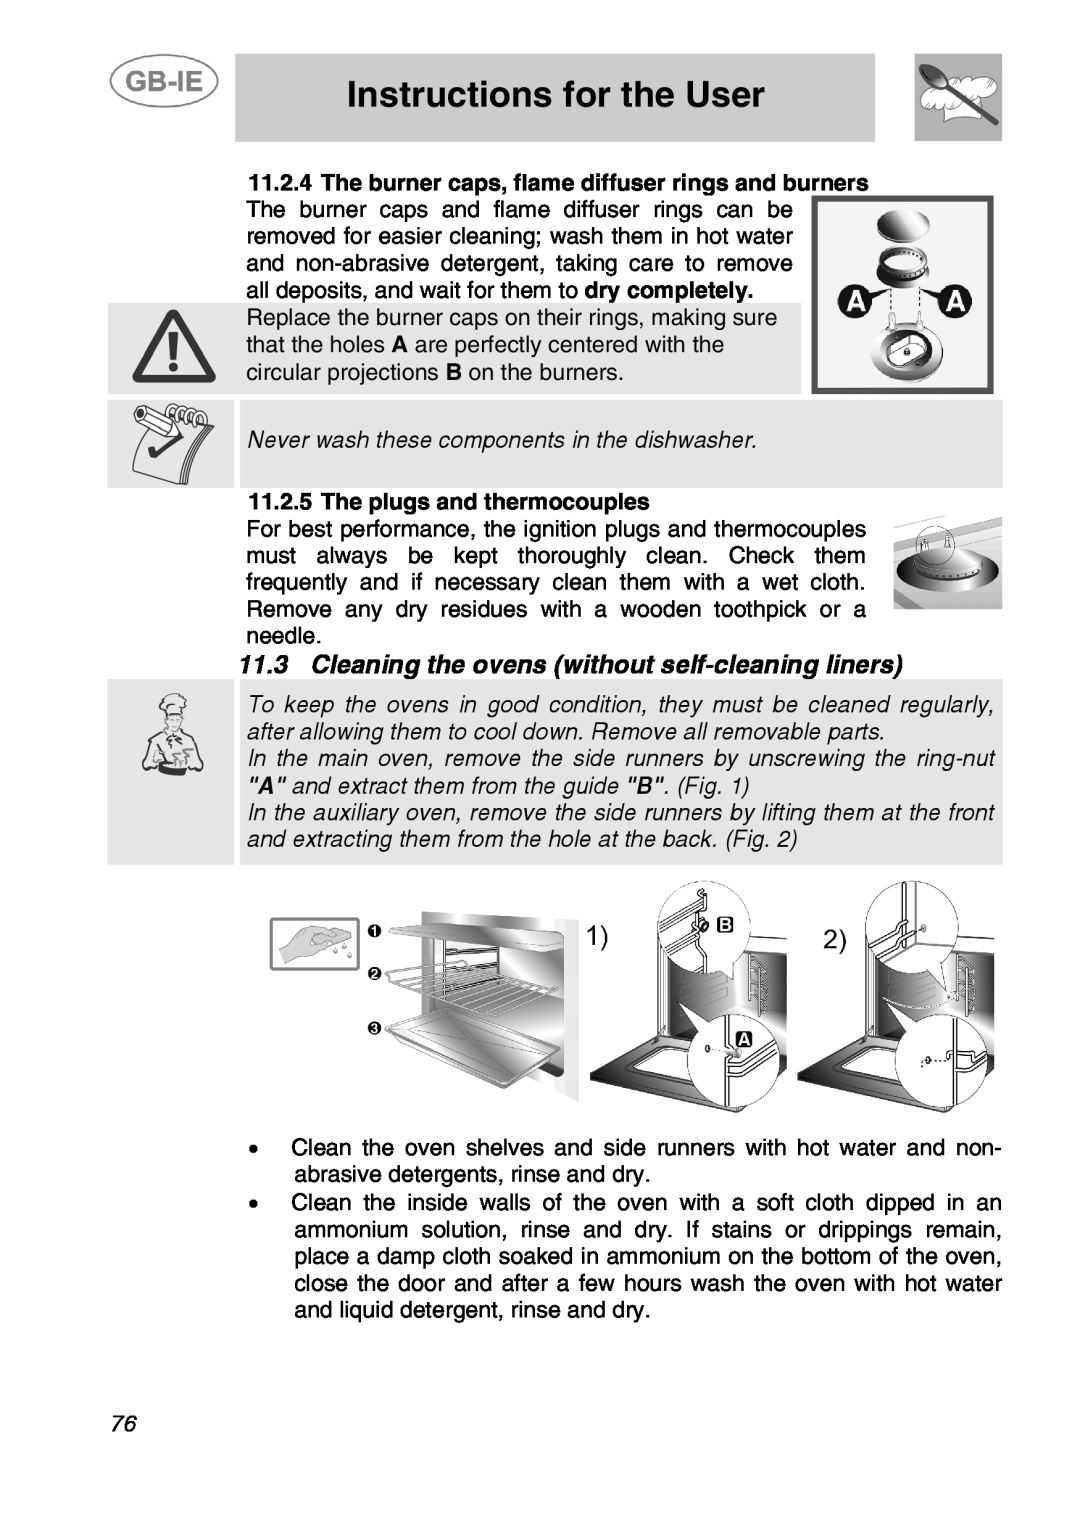 Smeg A5-6 manual Cleaning the ovens without self-cleaning liners, The plugs and thermocouples, Instructions for the User 